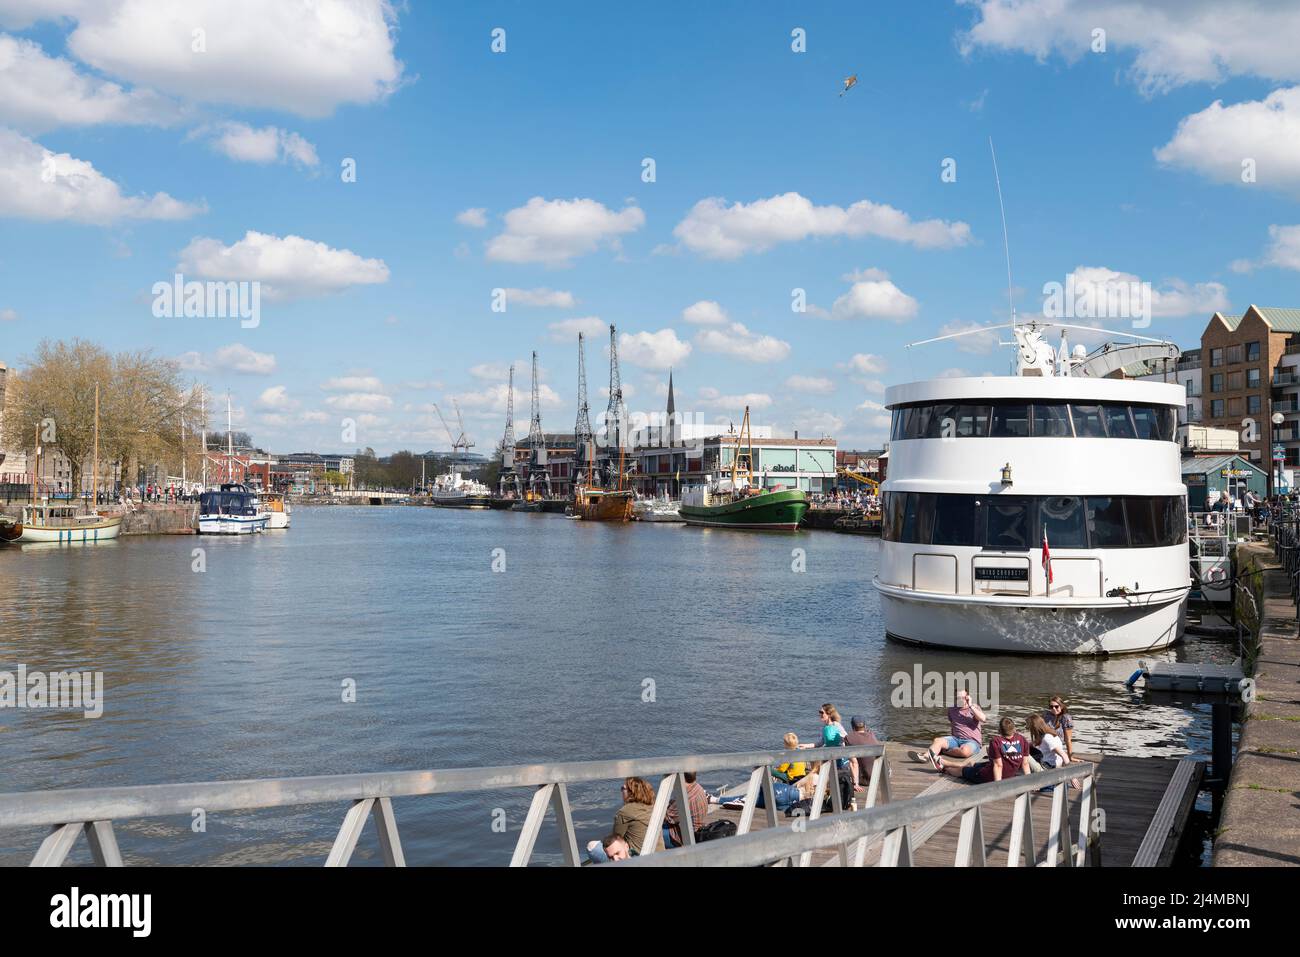 The Miss Conduct yacht moored in the Floating Harbour, Bristol with the mShed in the background. Stock Photo